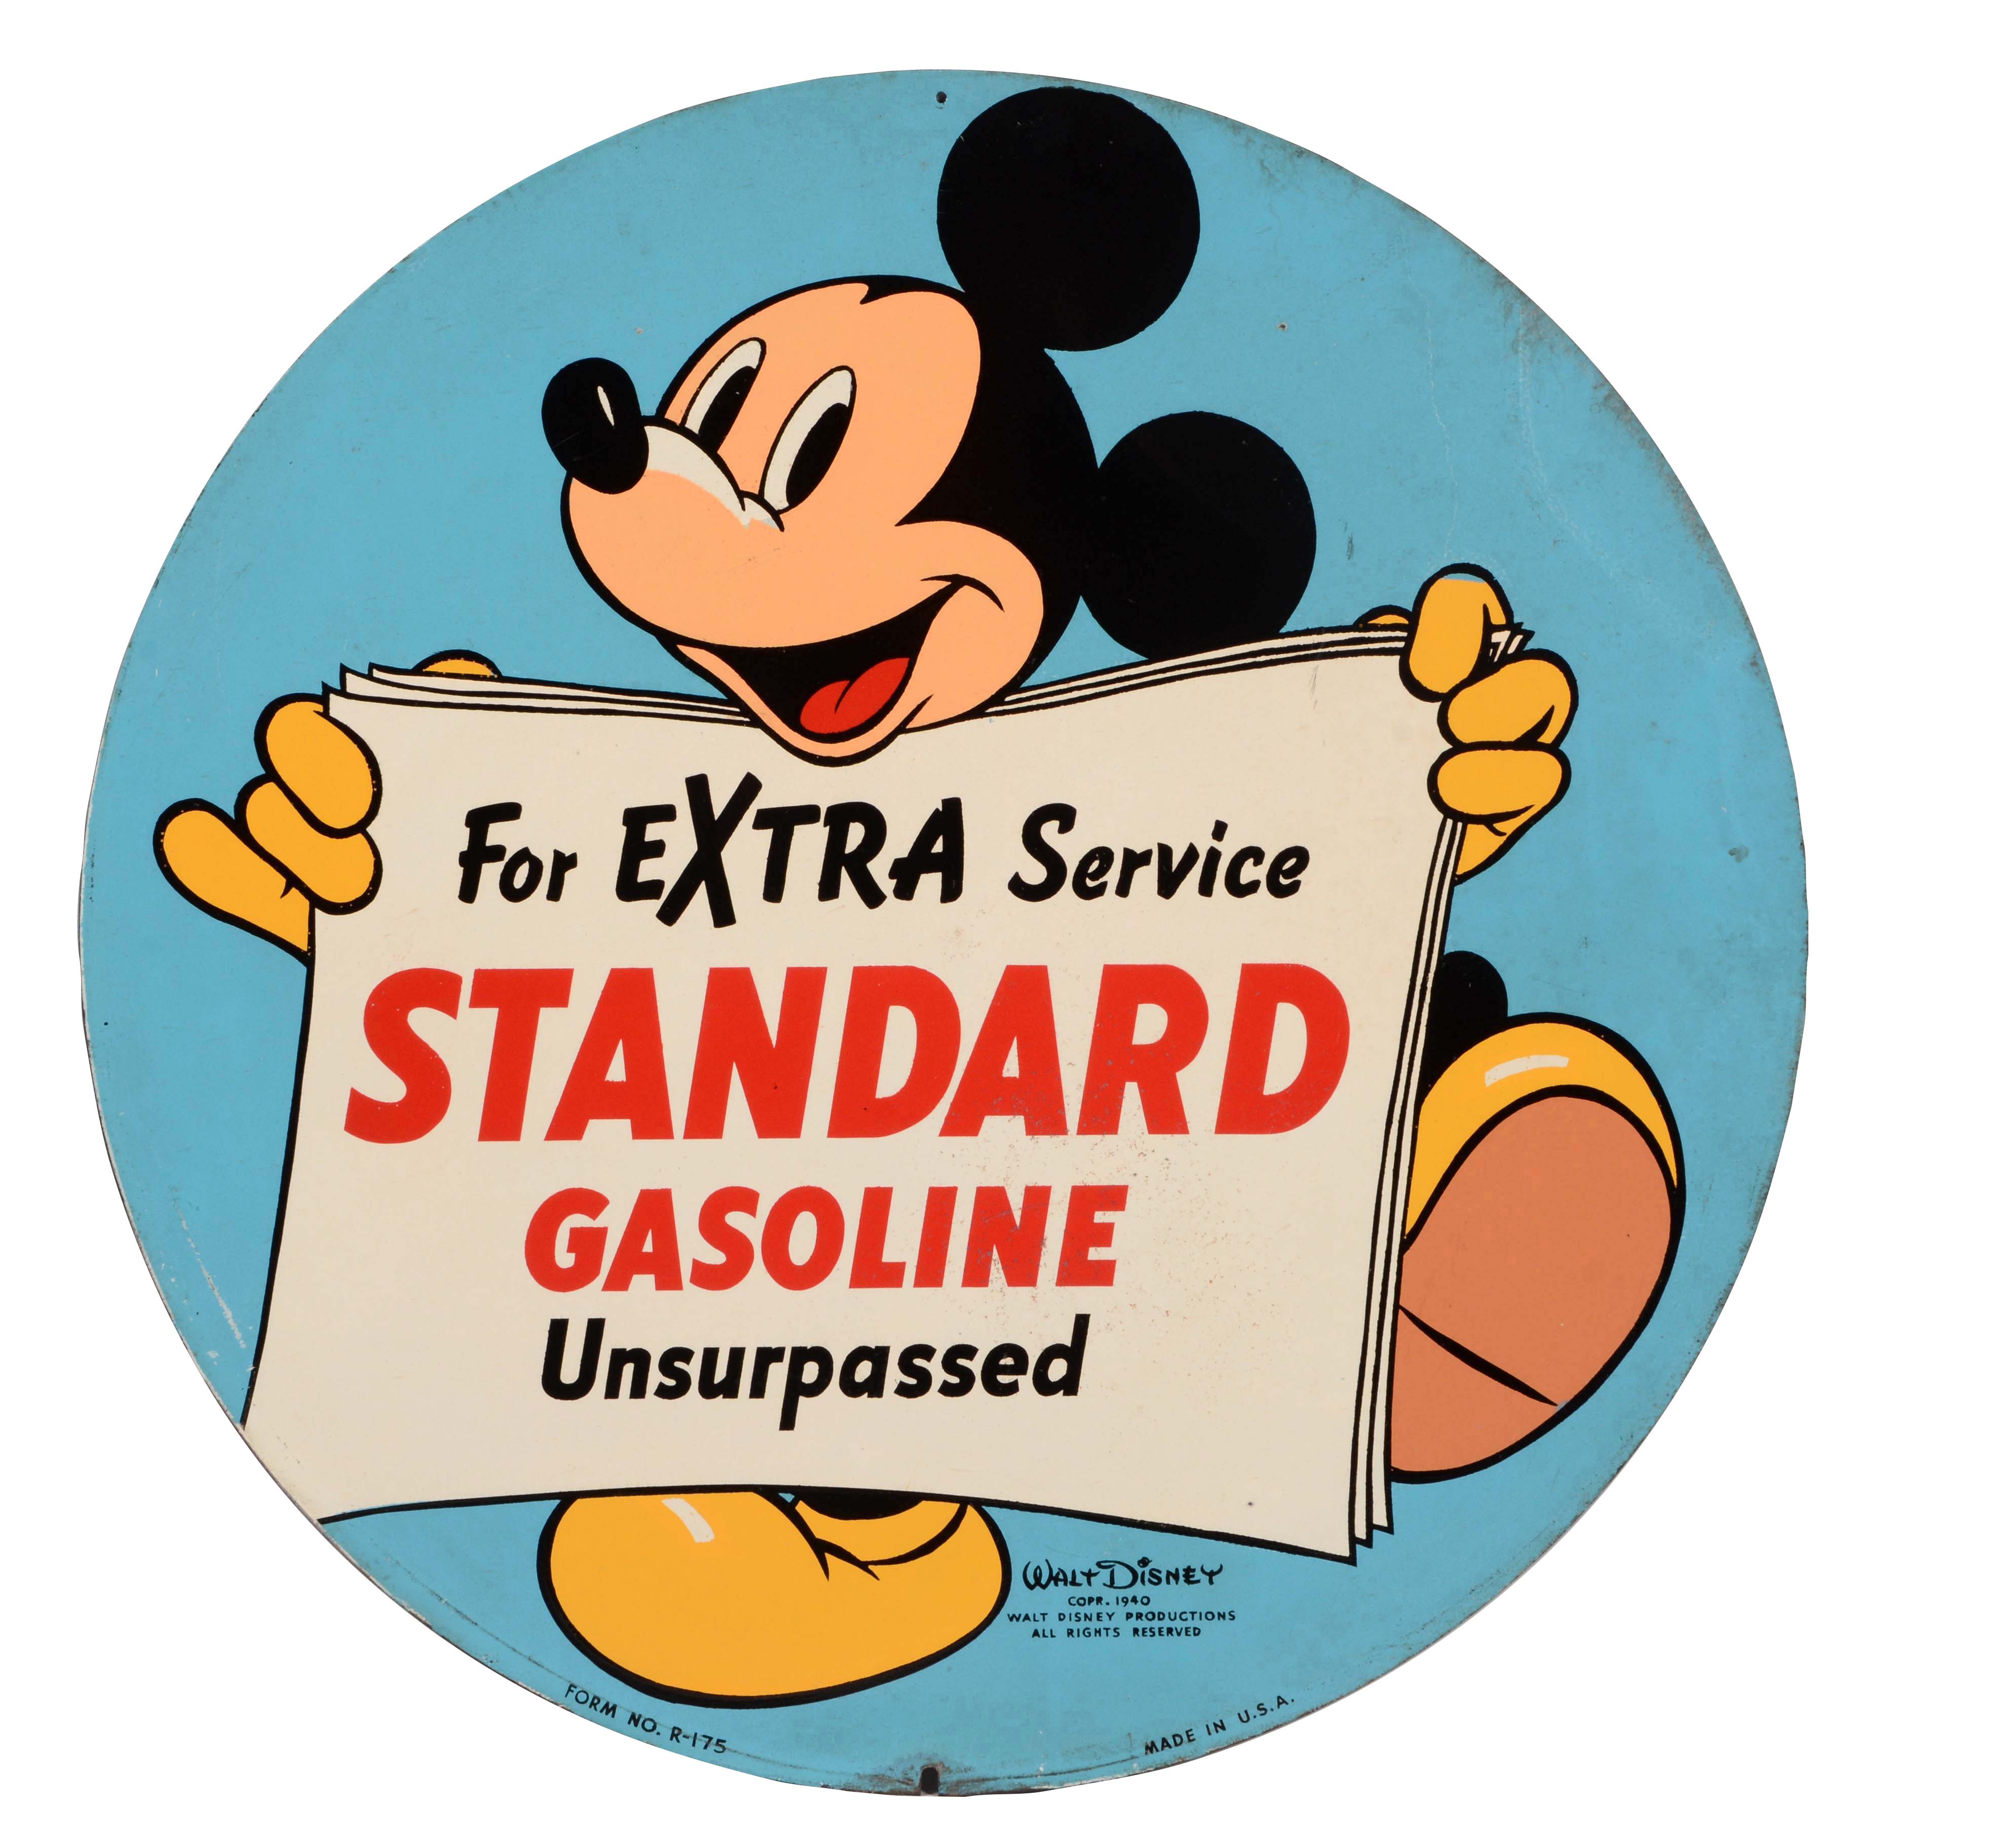 Mickey Mouse Gas. Масло Микки. Standard gasoline. Mickey sign. Most people know all about mickey